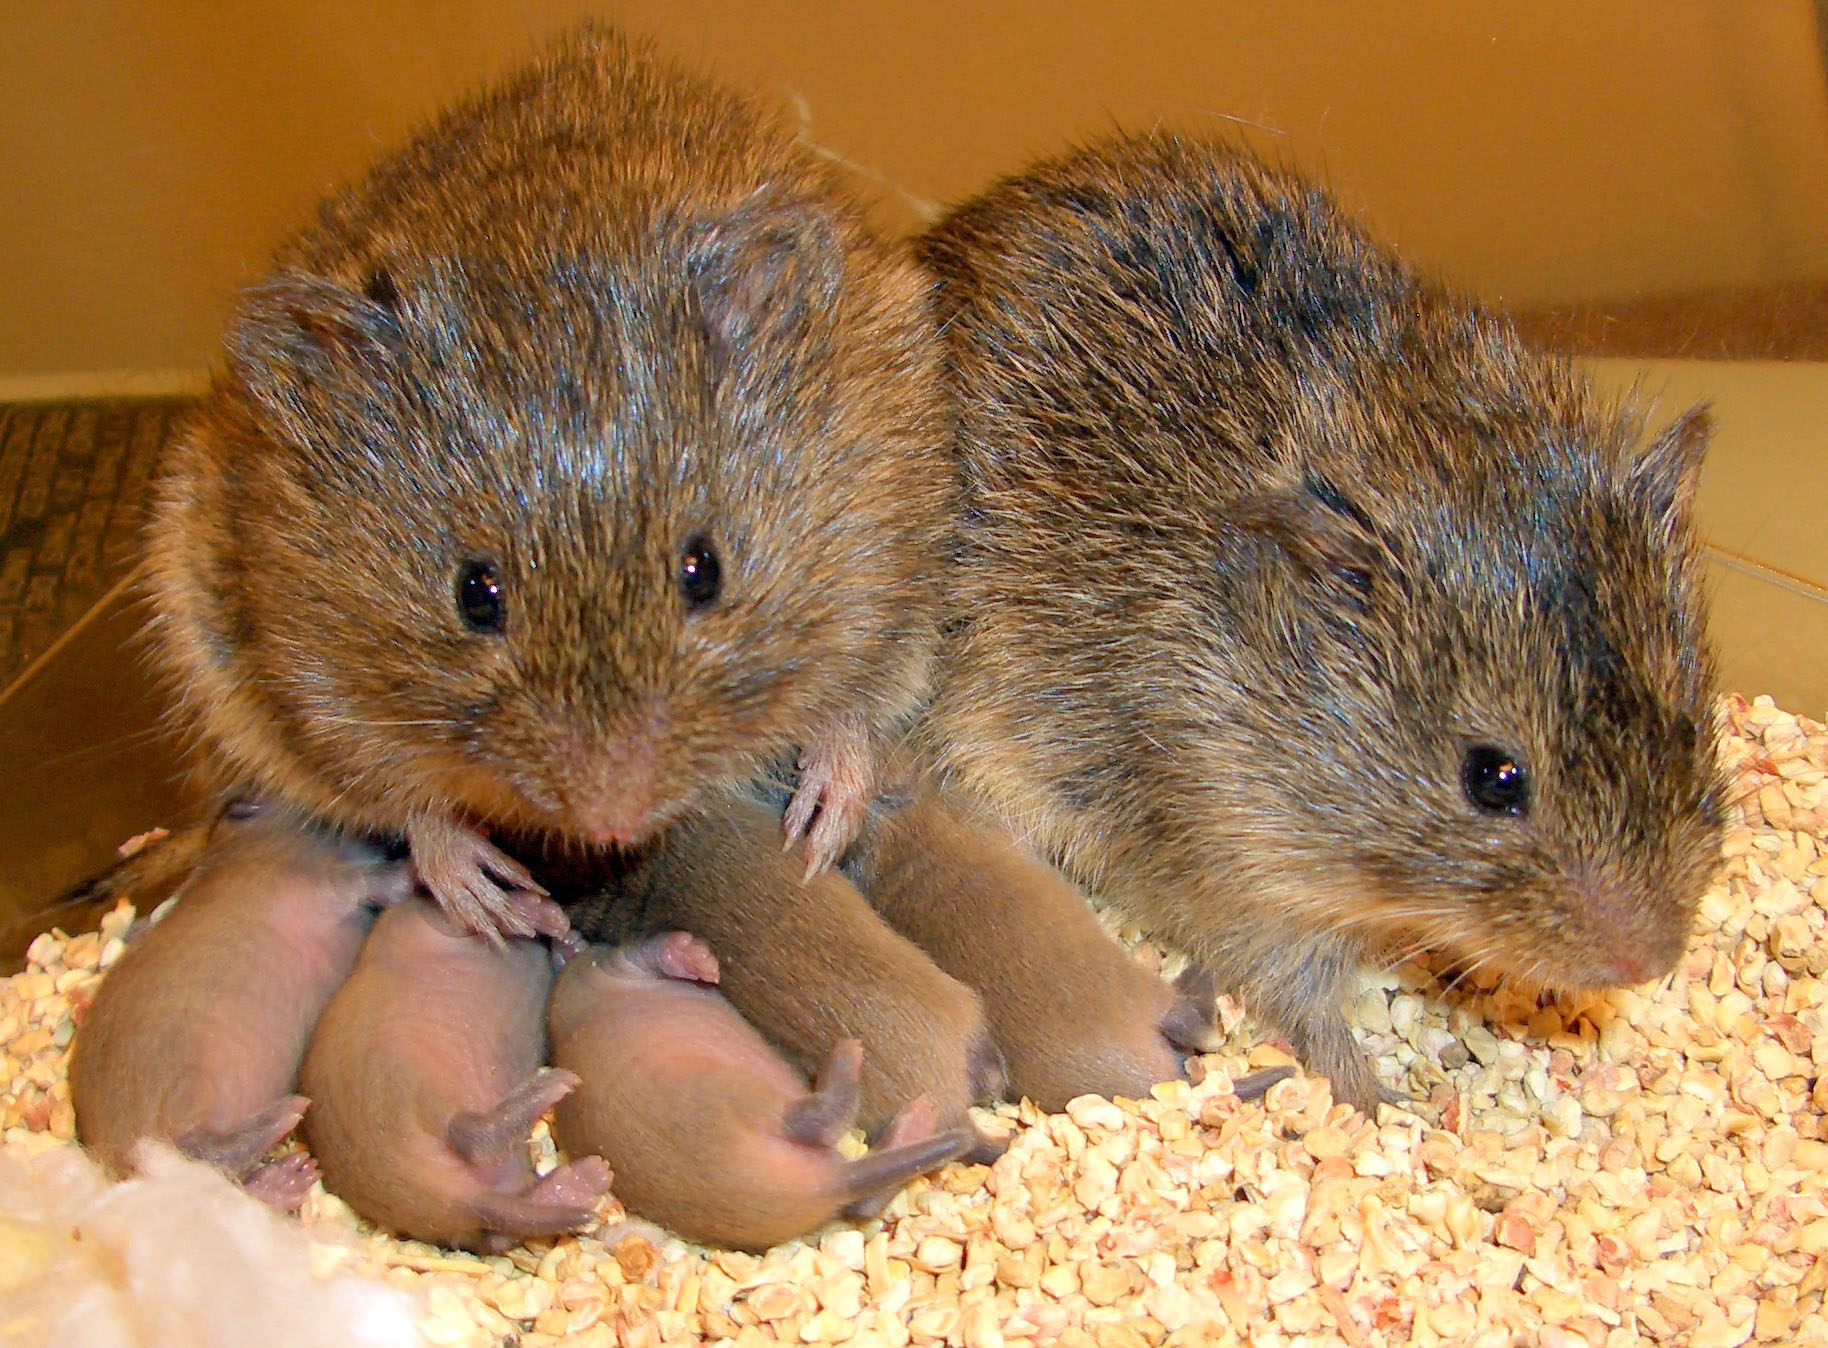 Among prairie voles, both parents take equal responsibility in rearing offspring Credit: Todd Ahern